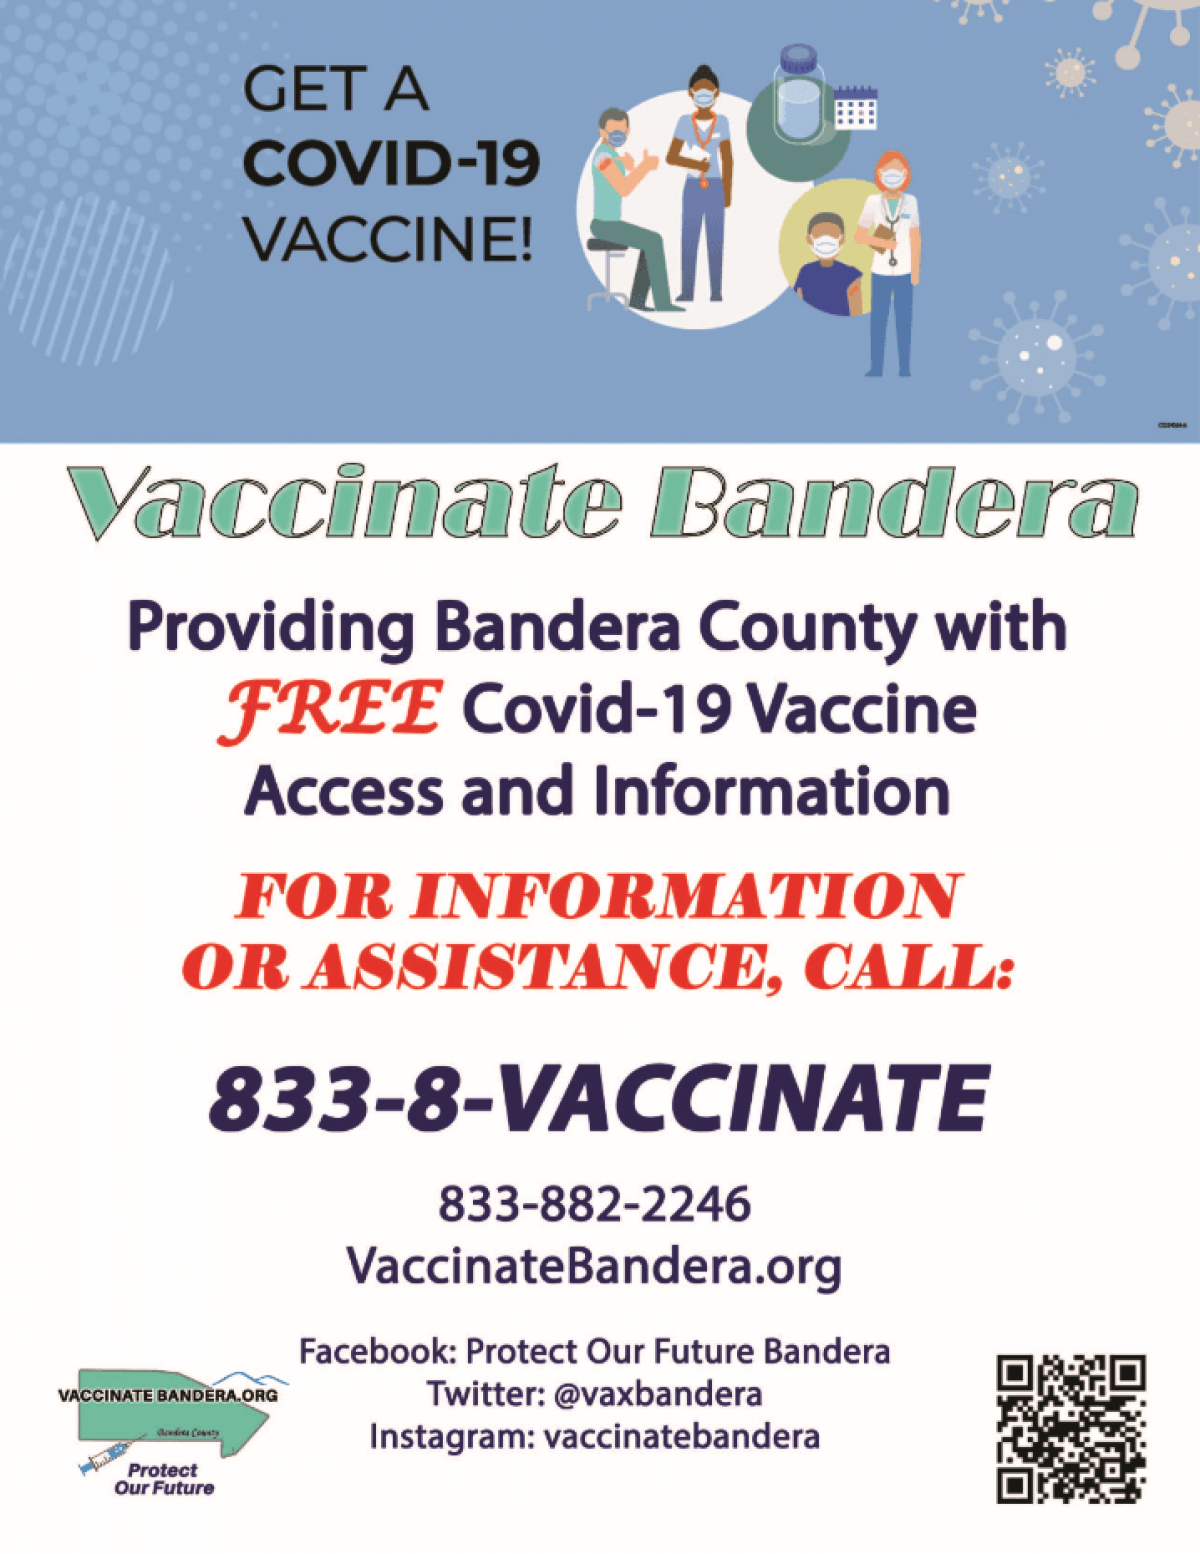 For assistance and information regarding free COVID-19 Vaccine Access call 833-8-VACCINATE (833-882-2246) or visit VaccinateBand